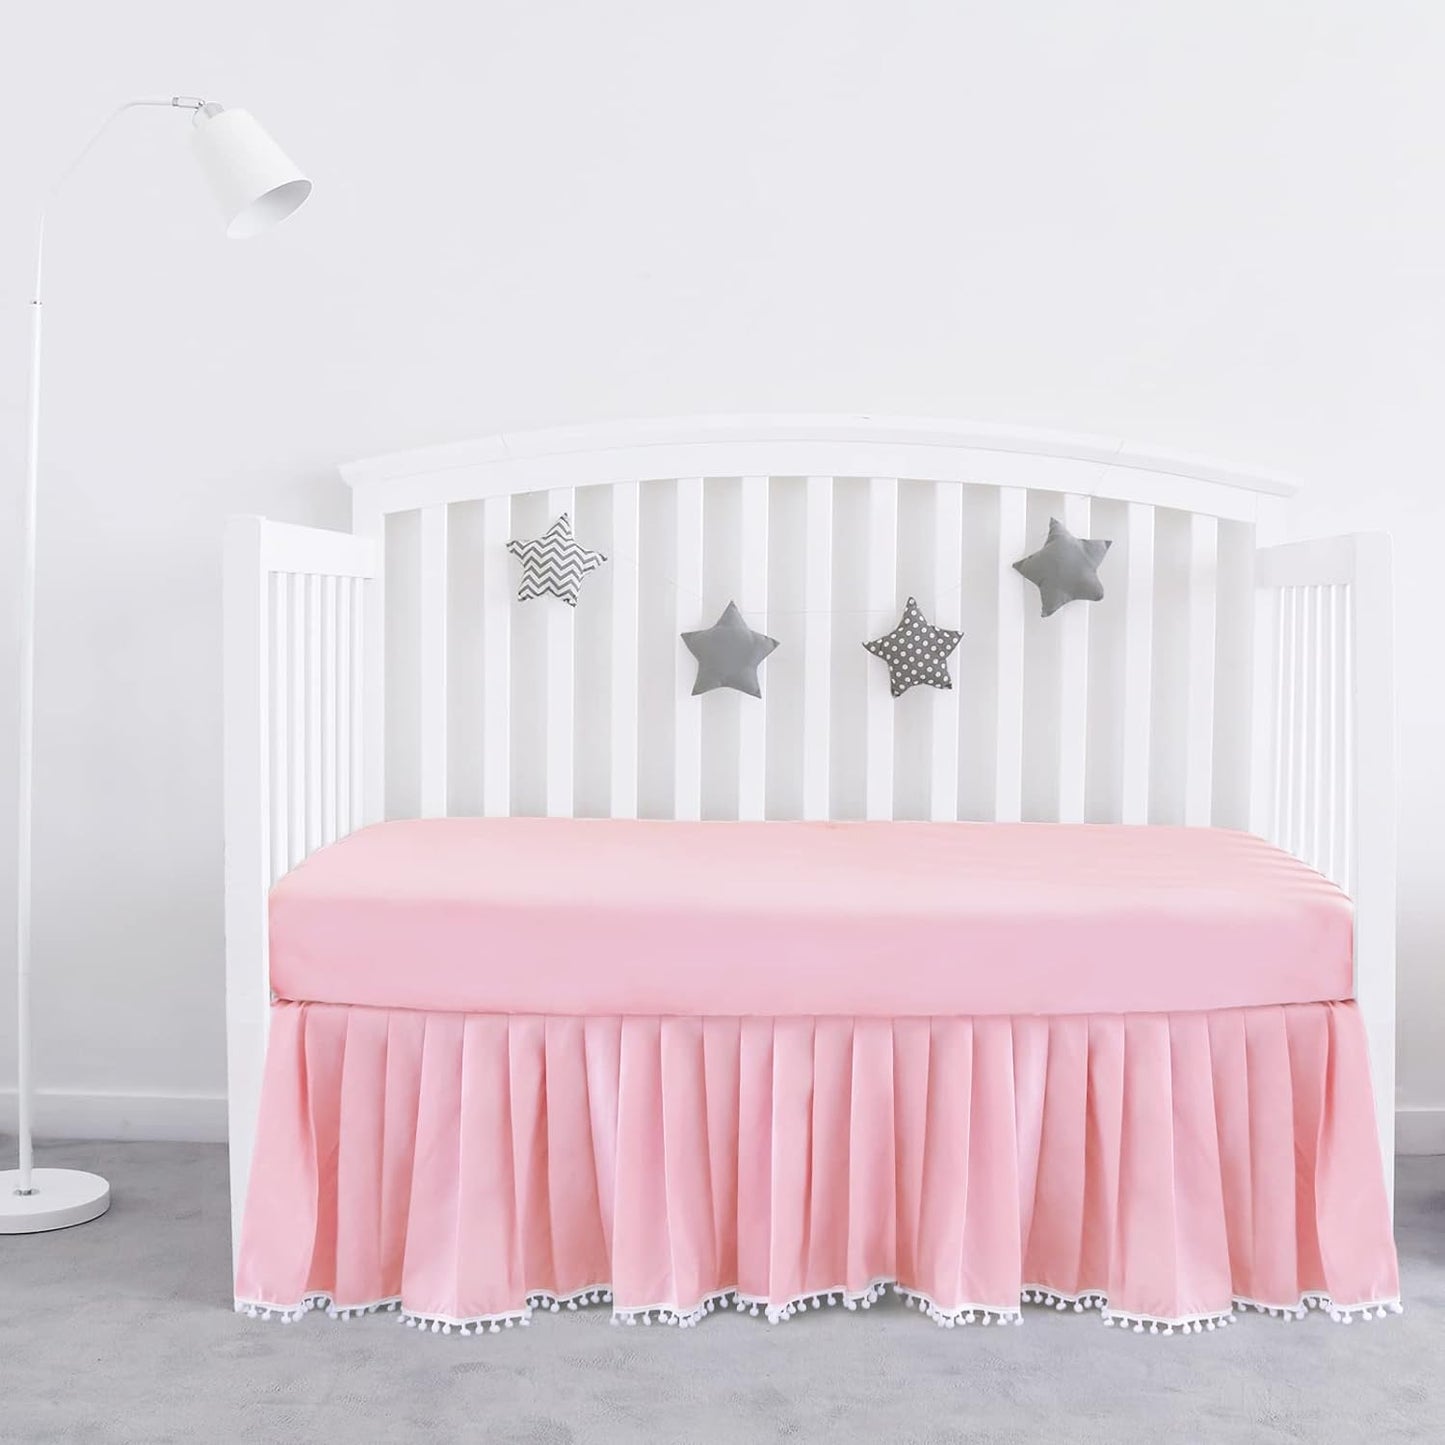 Crib Skirt - Dust Ruffle with Lovely Pompoms, 14" Drop, Pink (for Standard Crib Bed) - Biloban Online Store